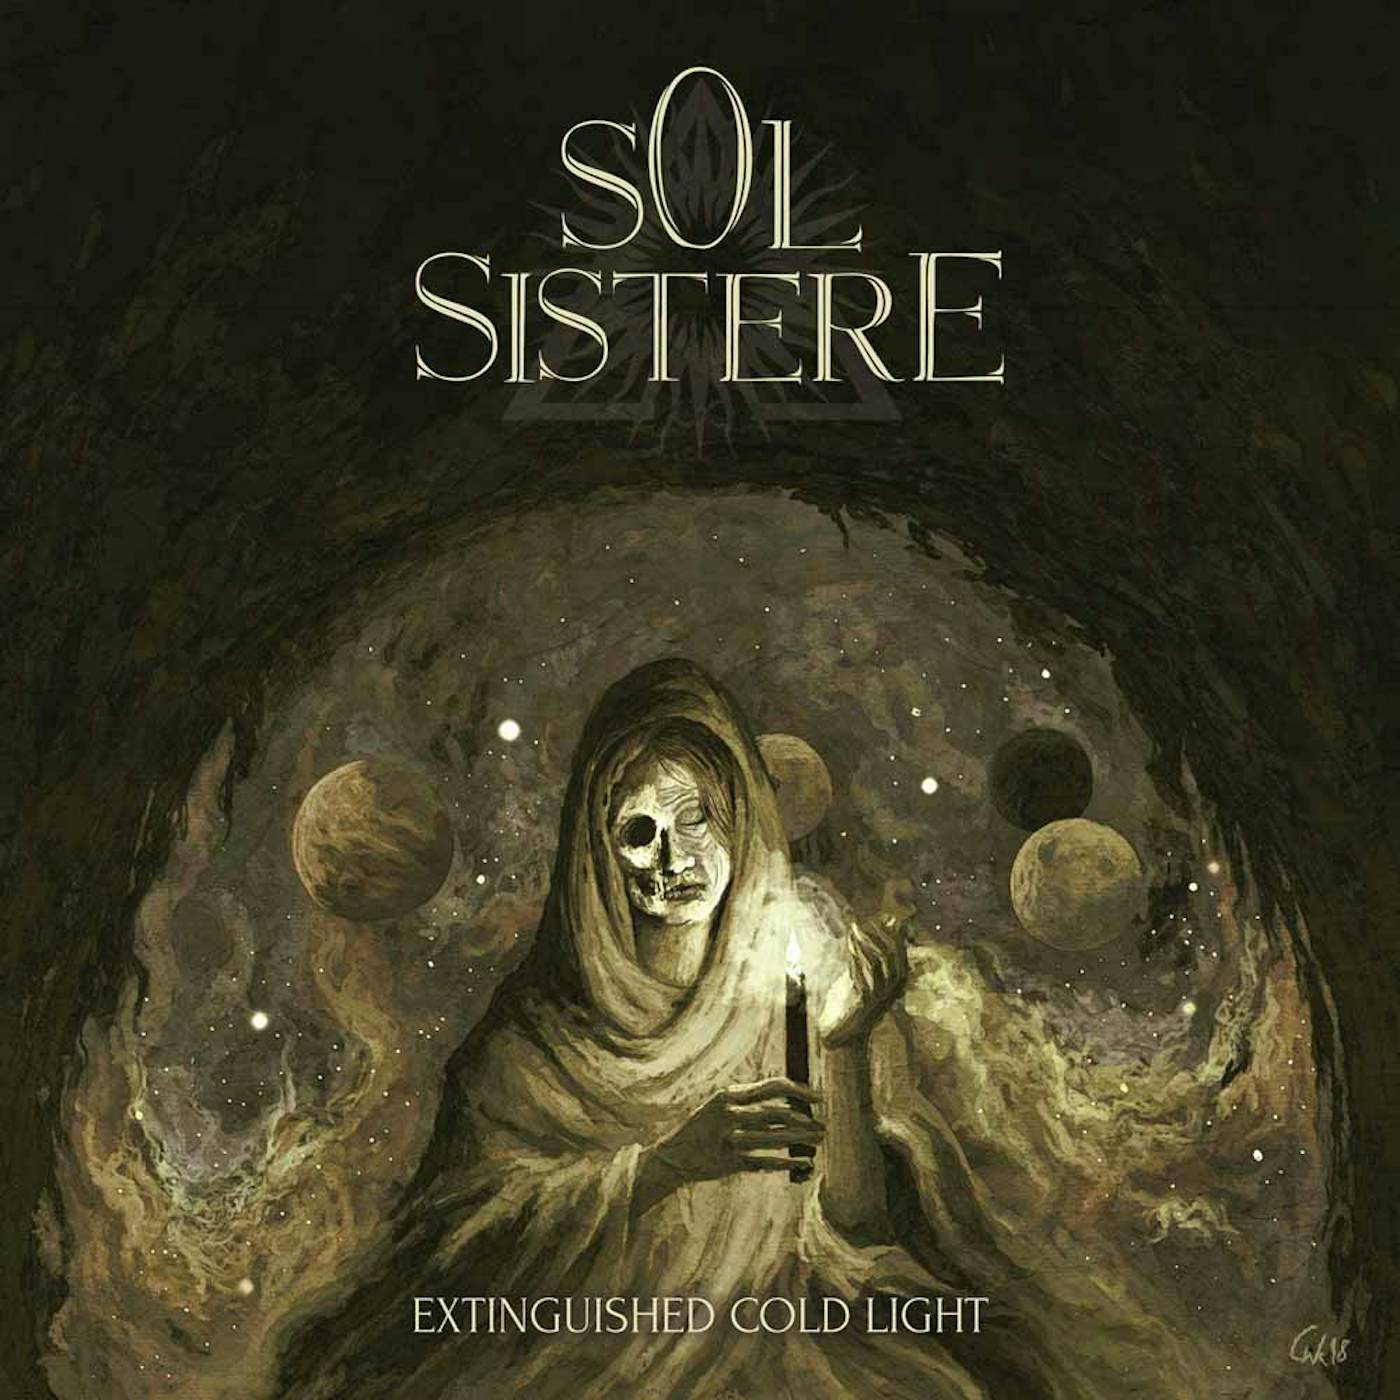 Sol Sistere Extinguished Cold Light Vinyl Record